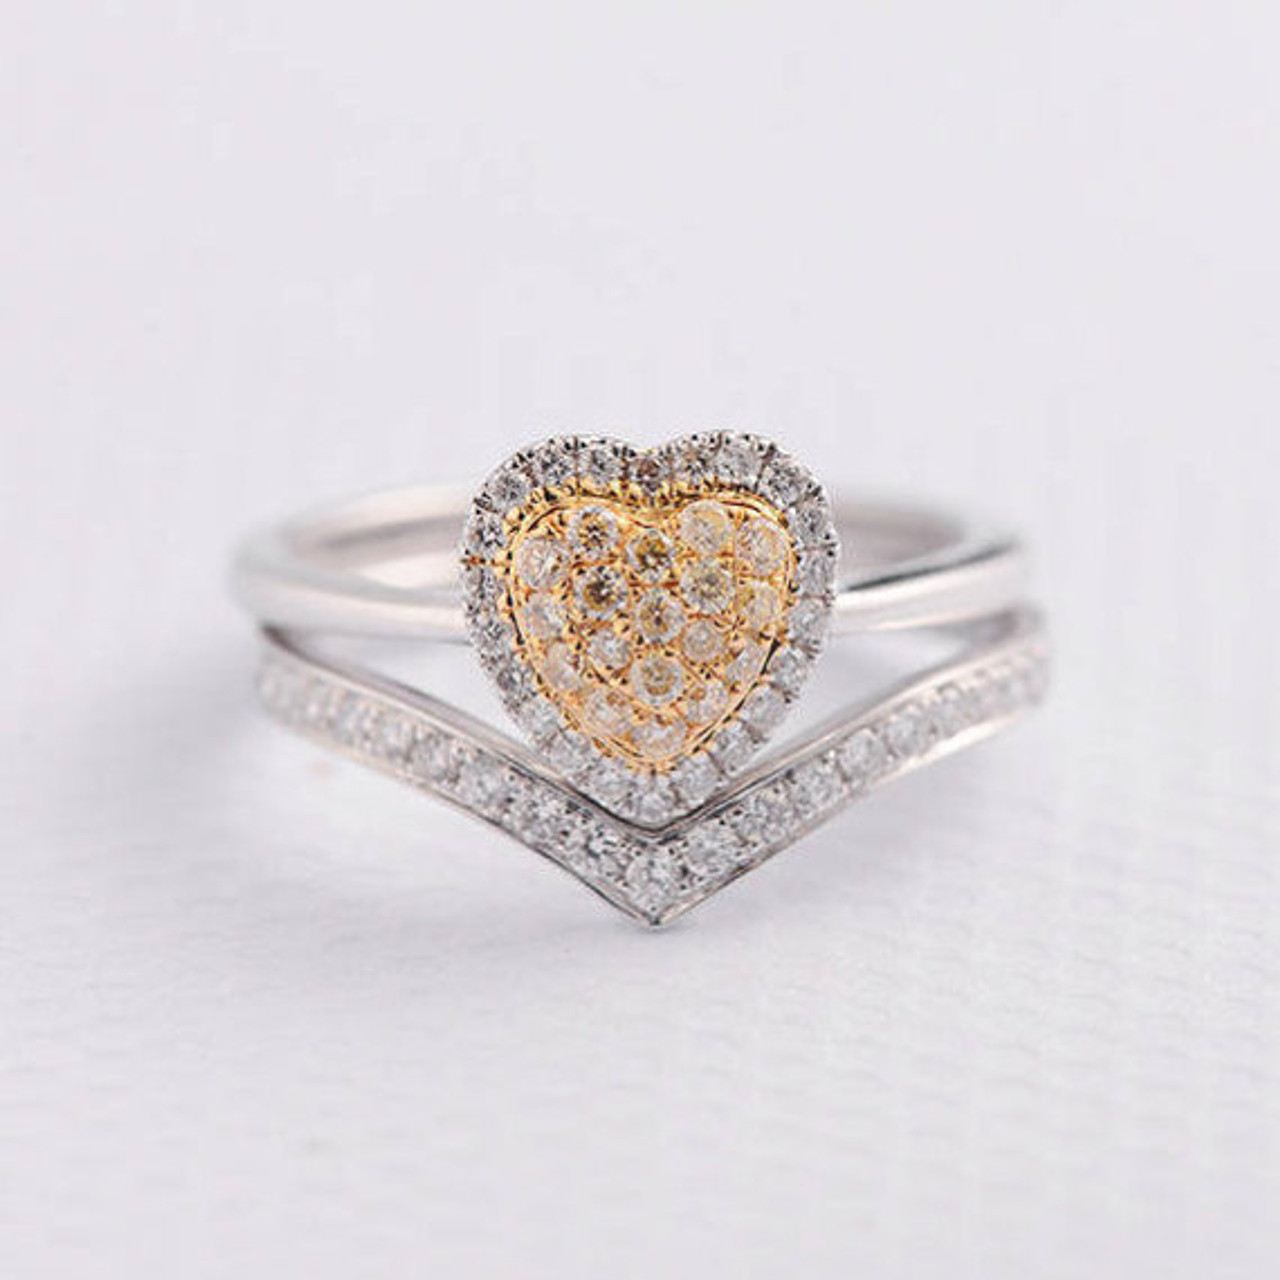 33 Unique Heart Engagement Rings Heart Shaped Engagement Rings Heart Engagement Rings Vintage Engagement Rings